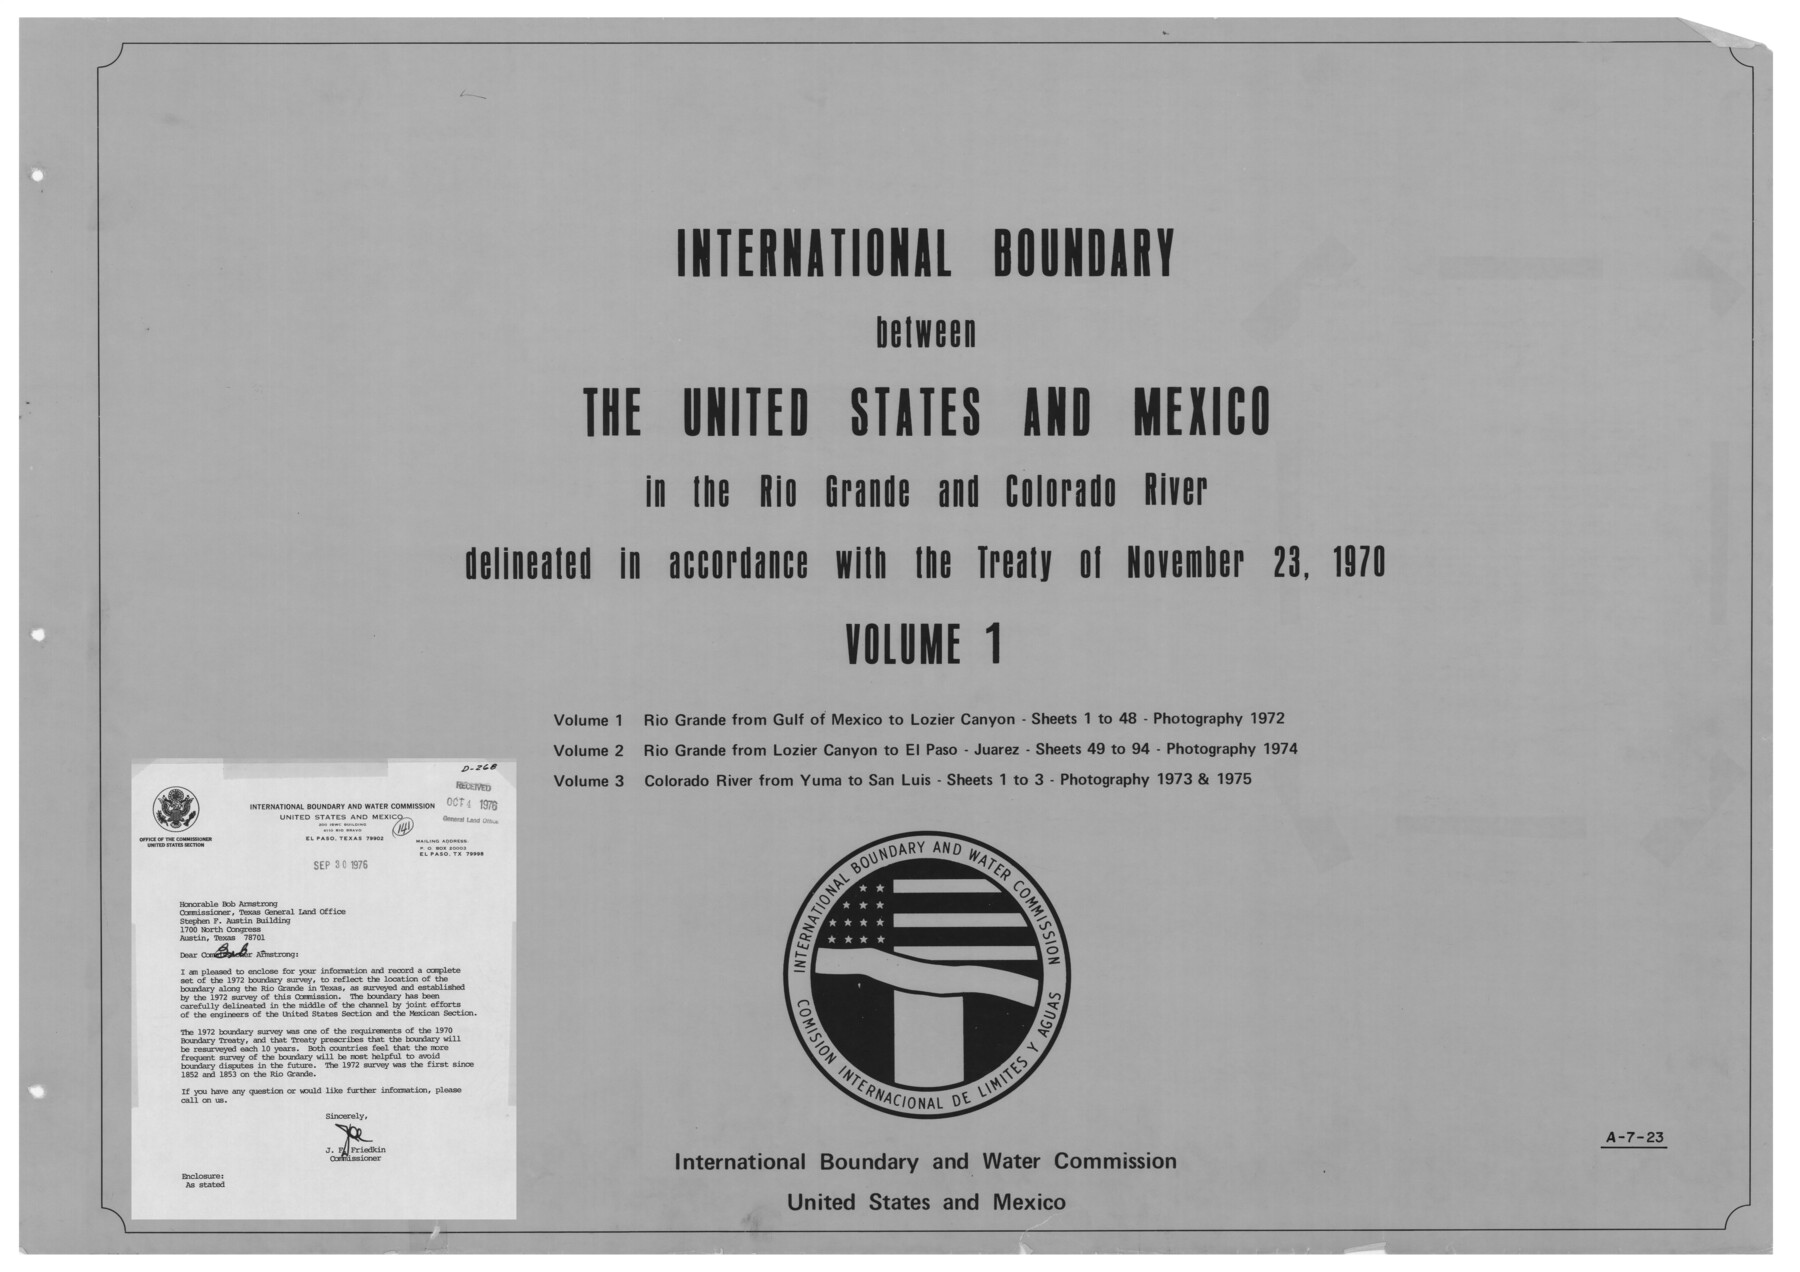 1747, International boundary between the United States and Mexico in the Rio Grande and Colorado River delineated in accordance with the Treaty of November 23, 1970 - Volume 1